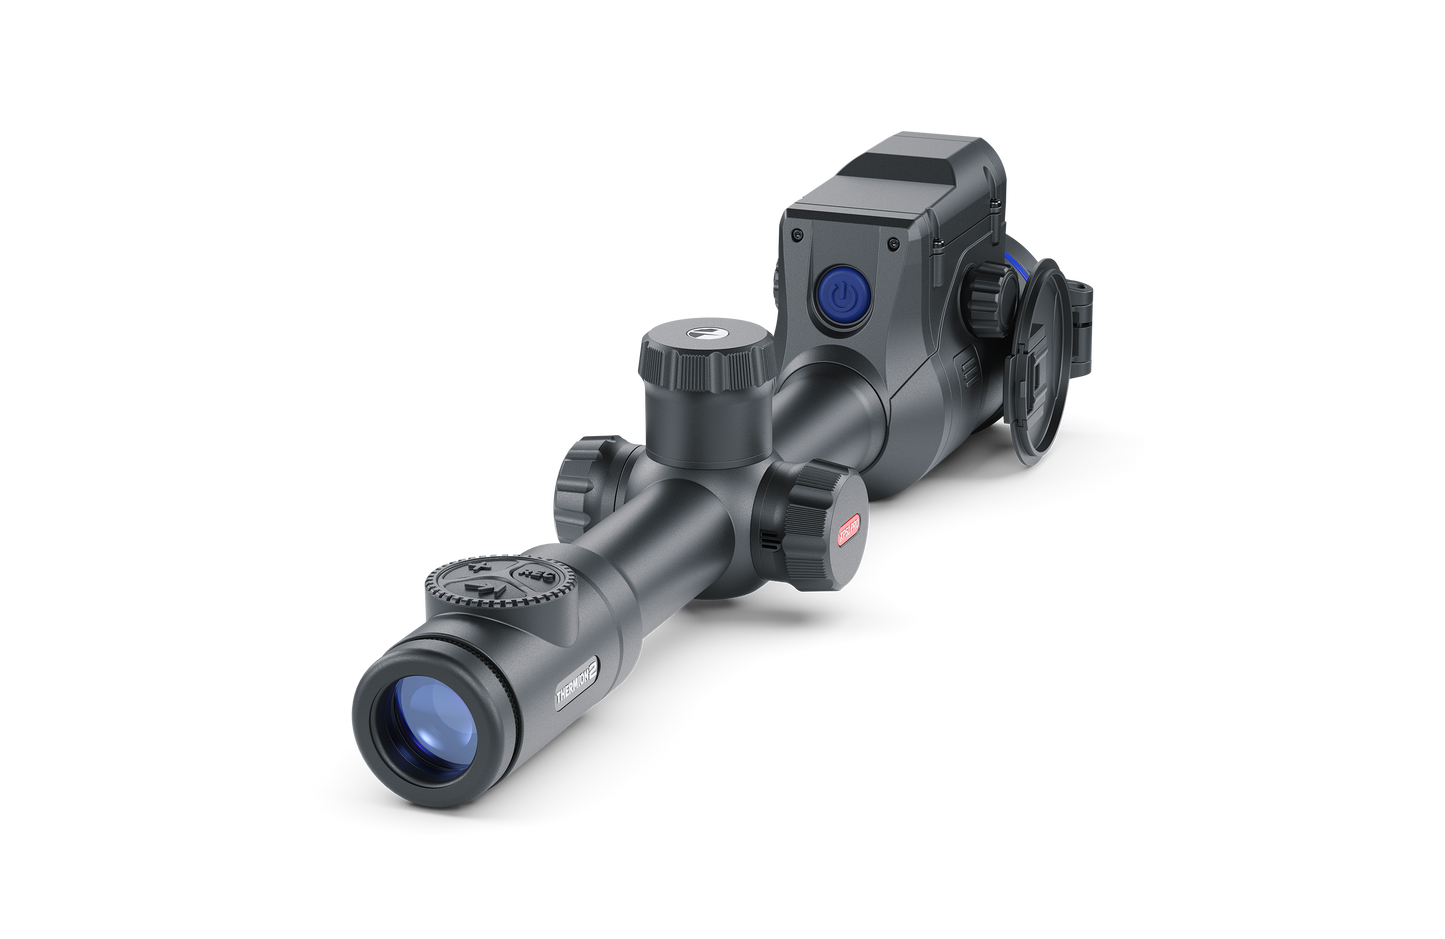 Pulsar Thermion 2 LRF XP50 Pro Thermal Riflescope